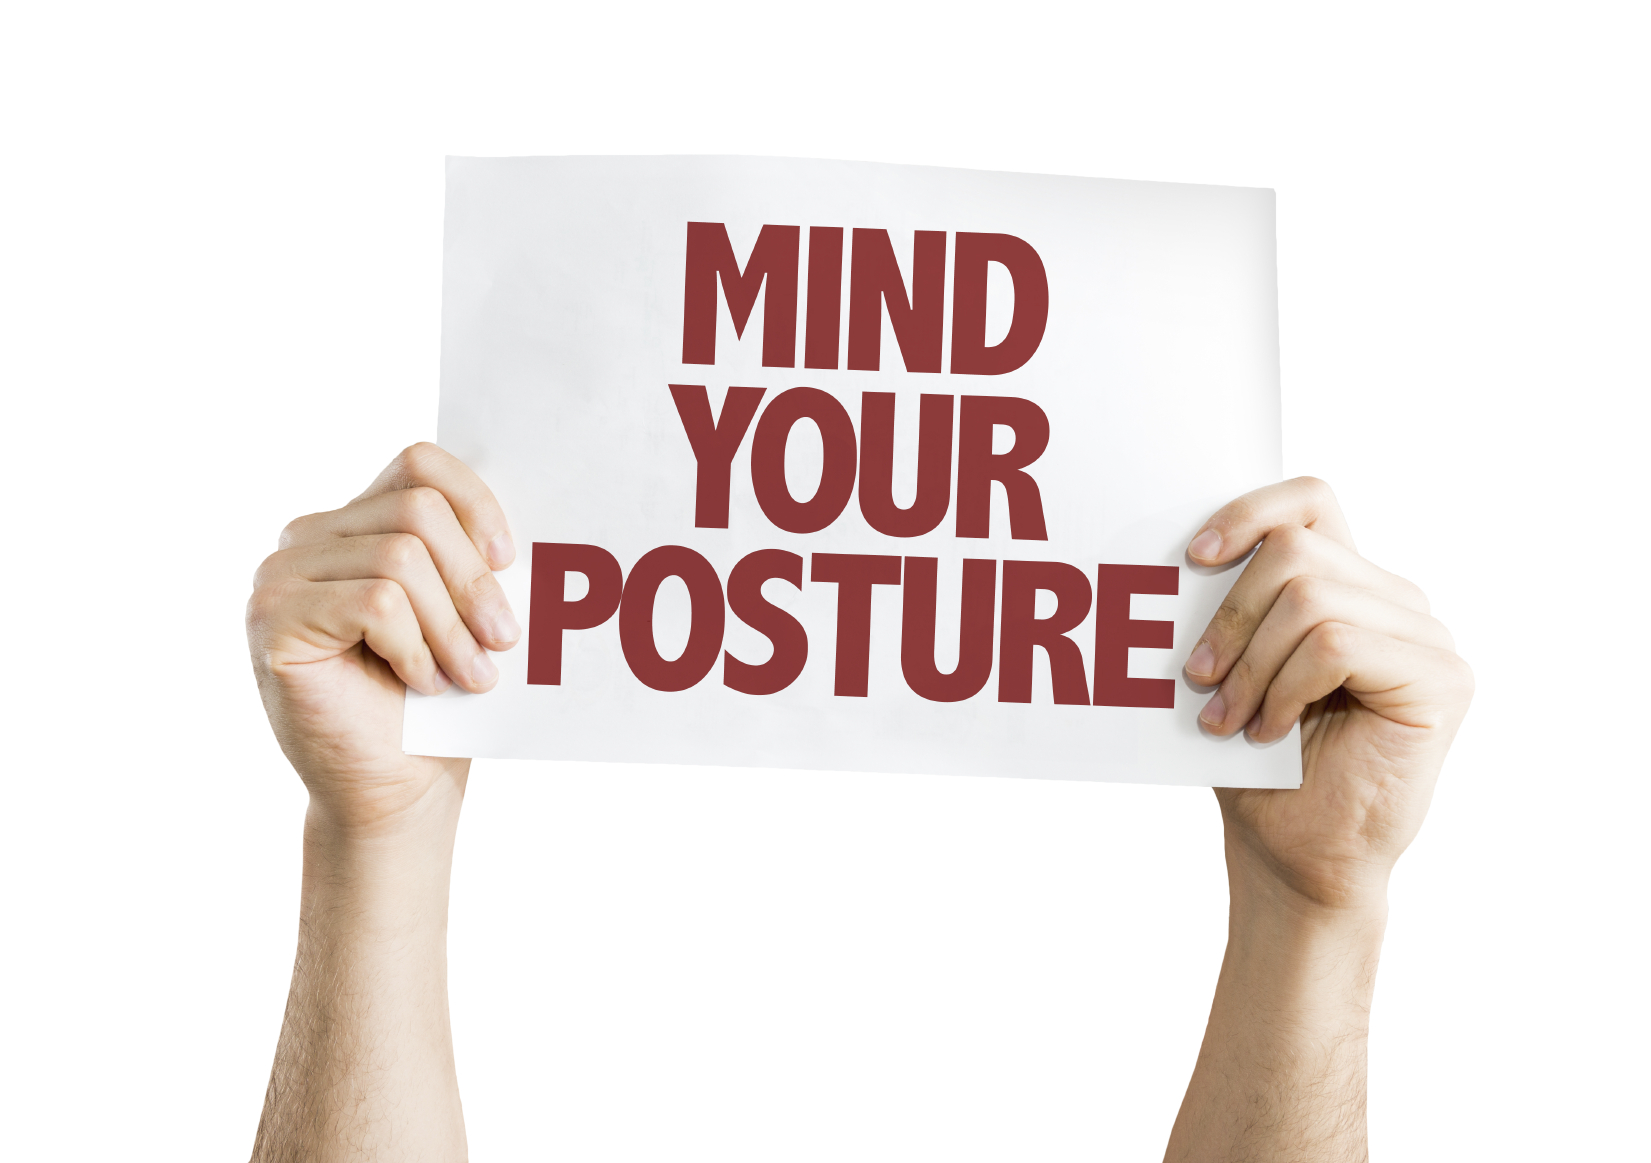 Check Your Posture for a Healthier Back